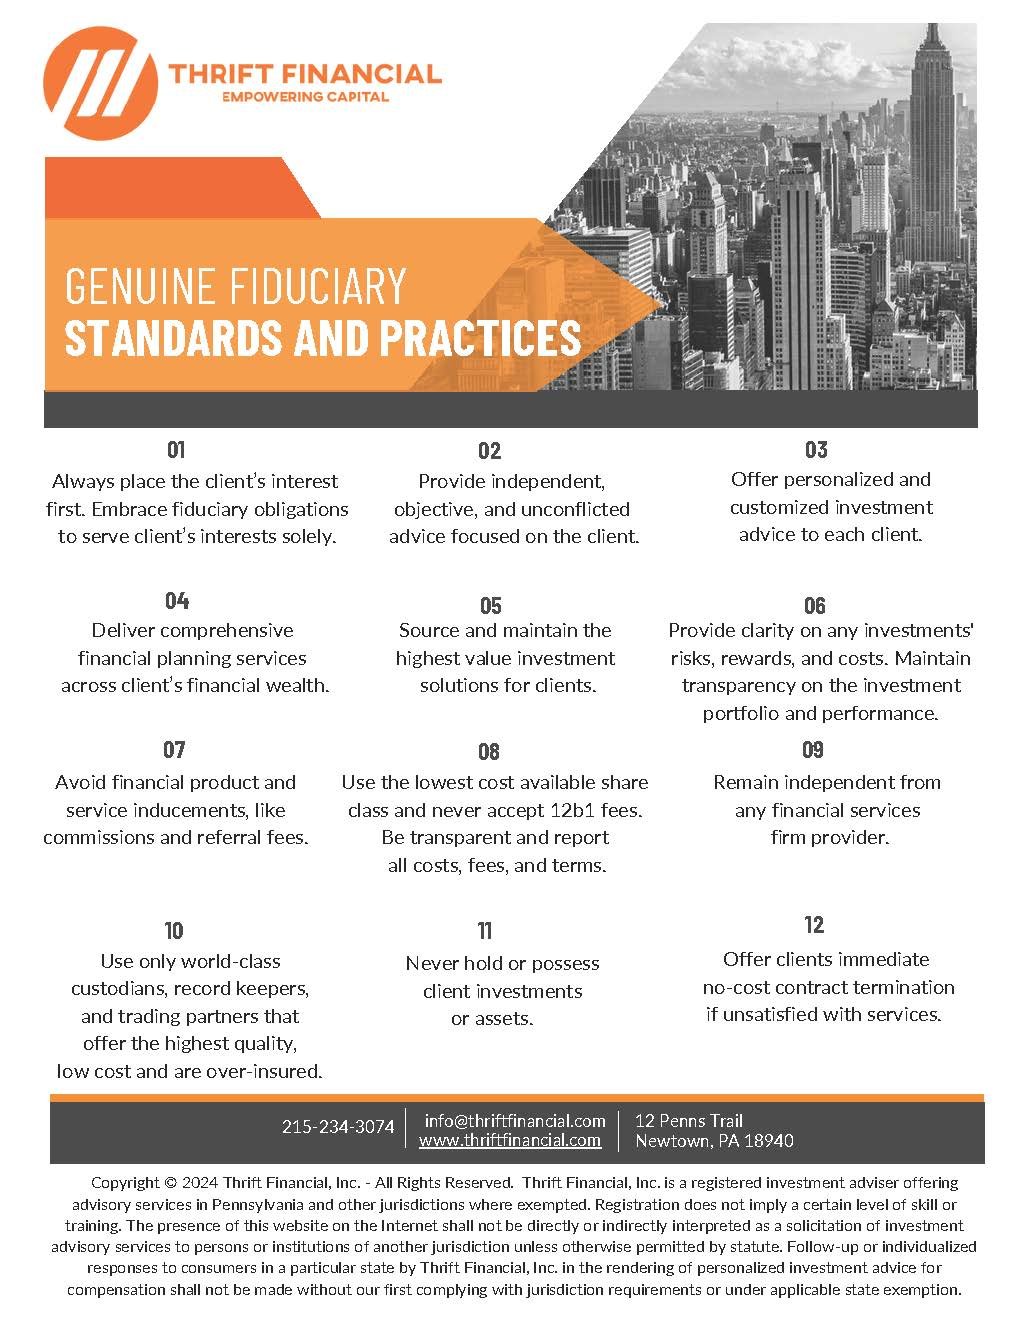 Fiduciary Article and Thrift Fiduciary Standards_Page_3